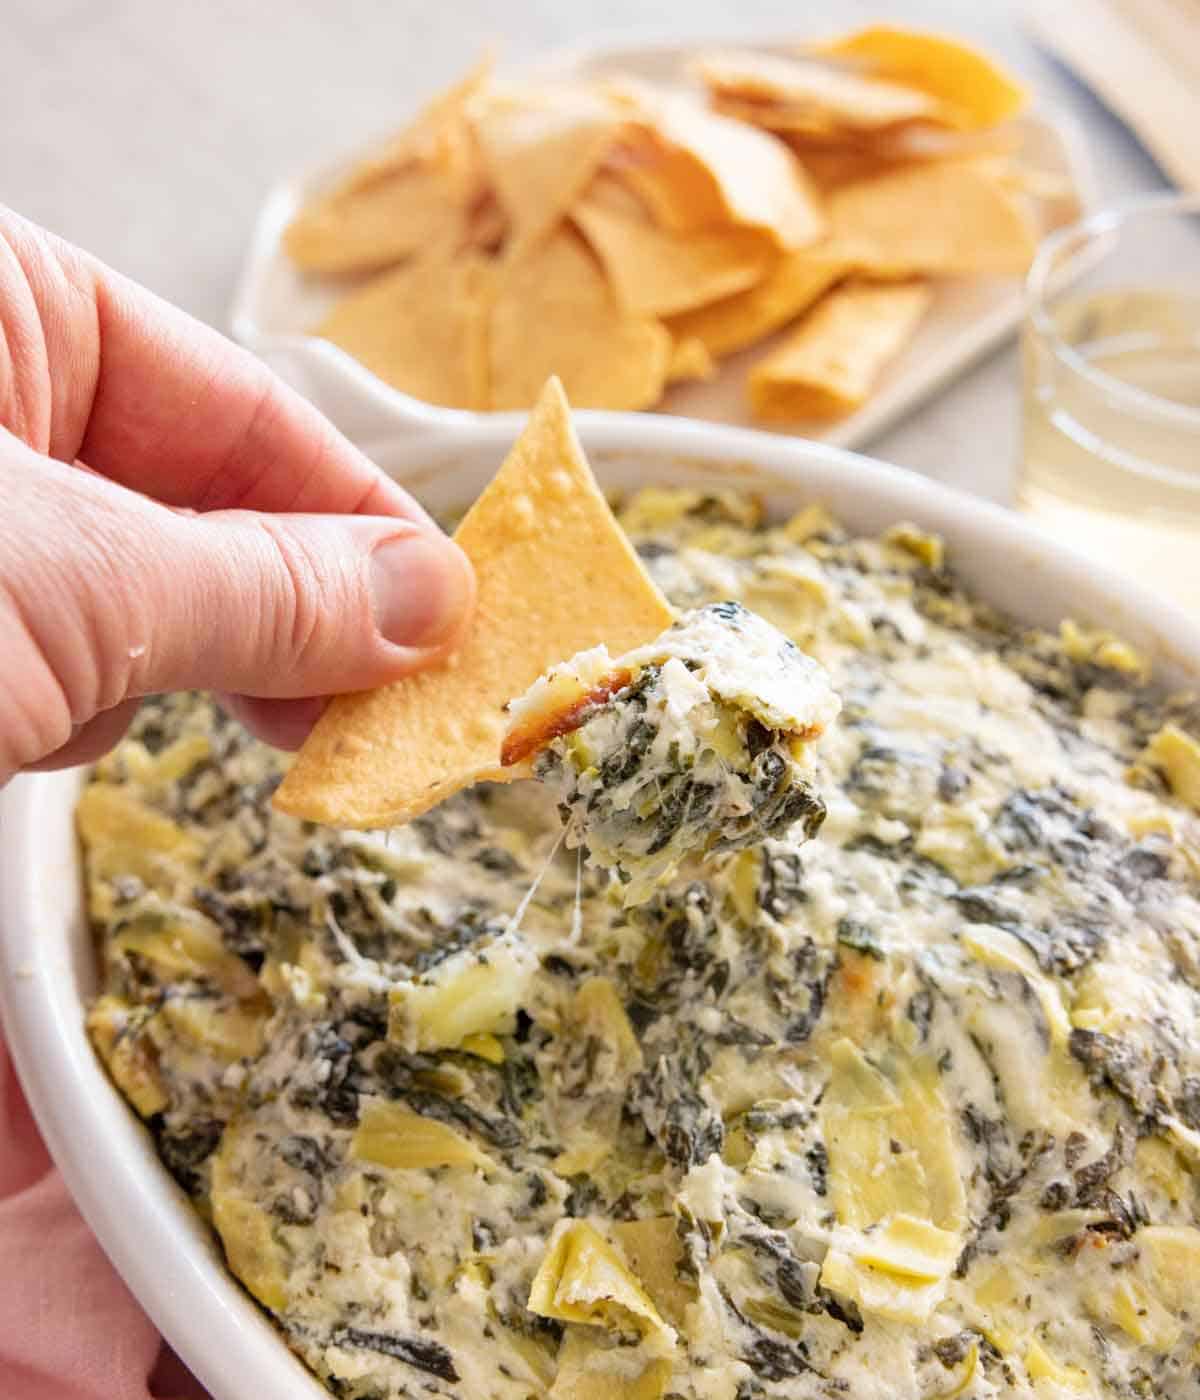 A chip scooping up spinach artichoke dip from a baking dish.